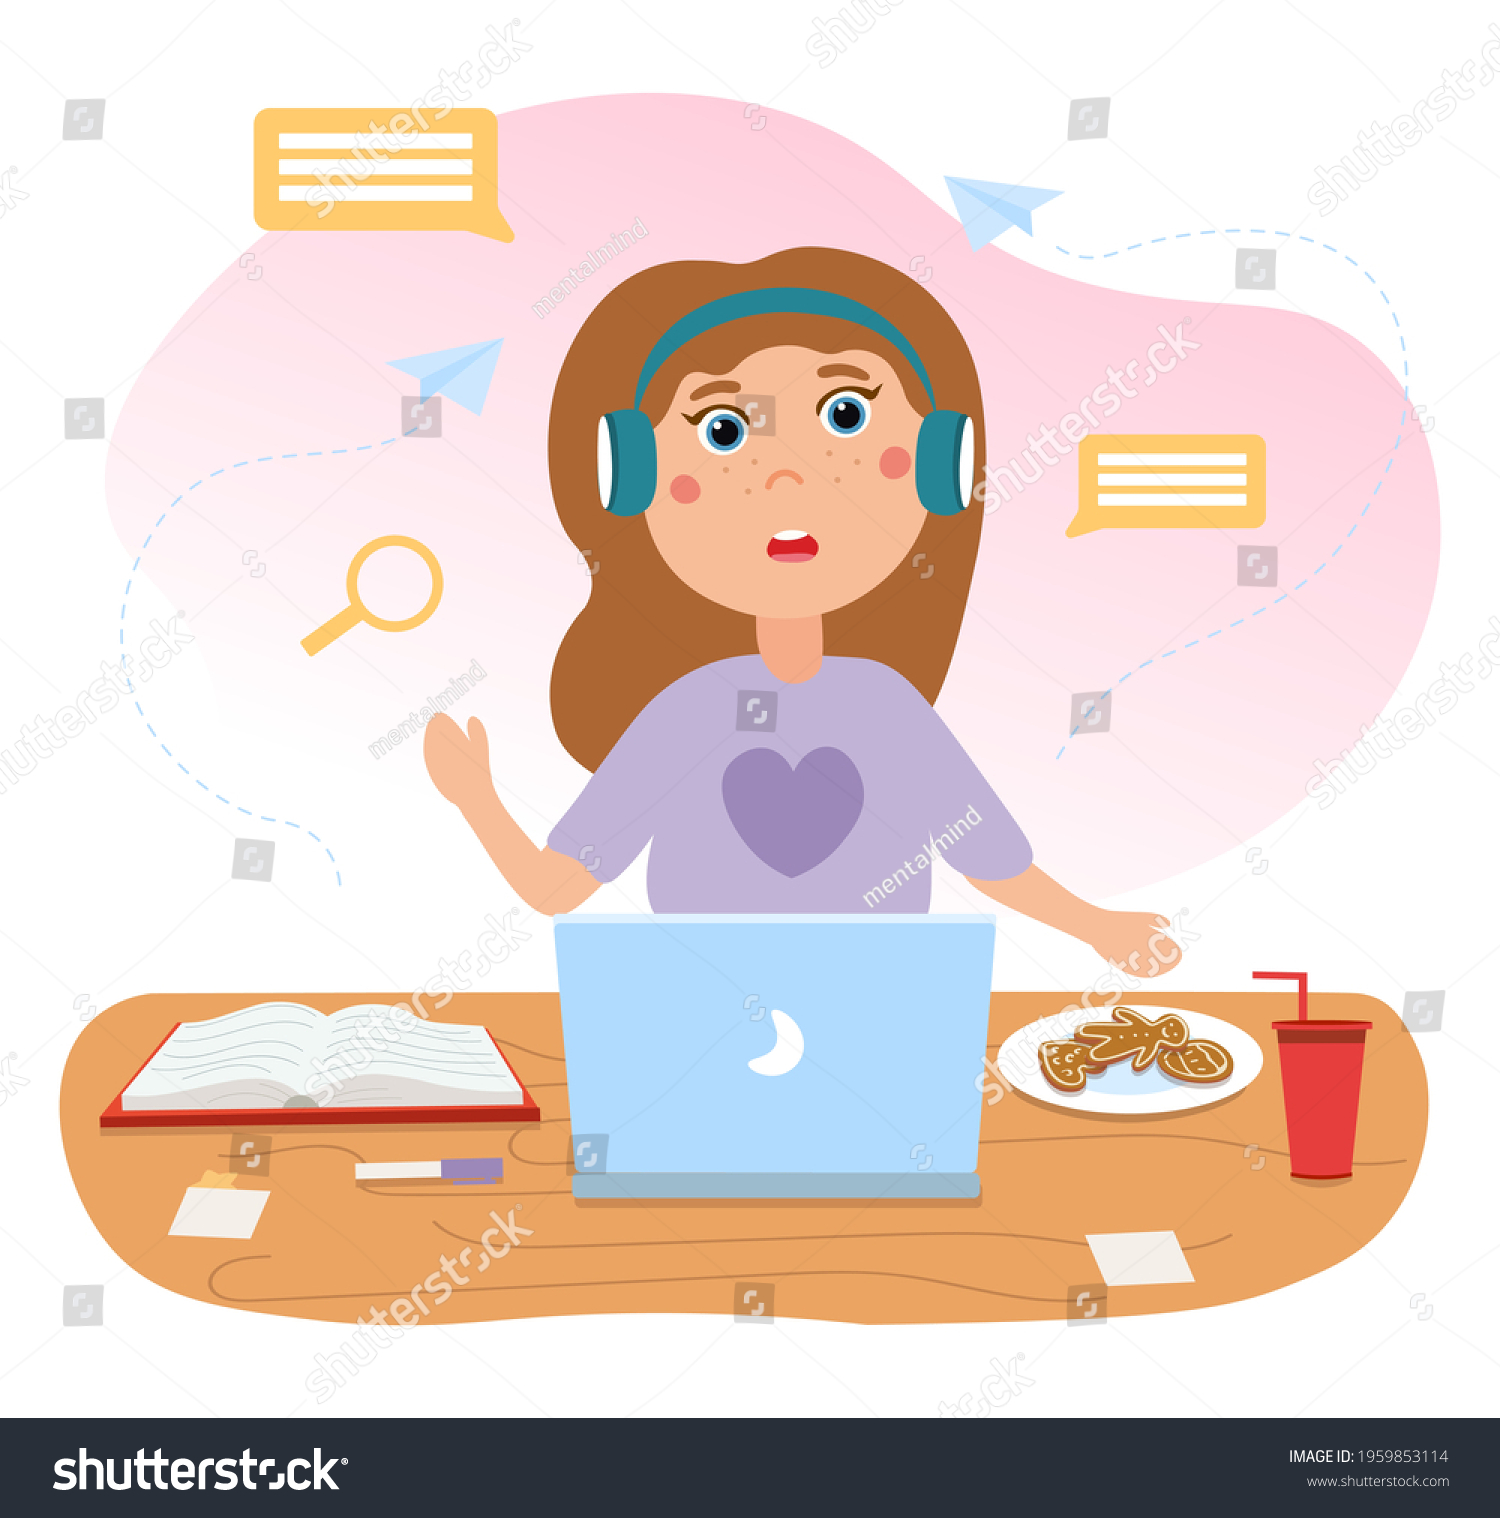 SVG of Cute girl is sitting in front of laptop in headphones with food and book on desk. Concept of advantages of remote online education for children during lockdown. Flat cartoon vector illustration svg